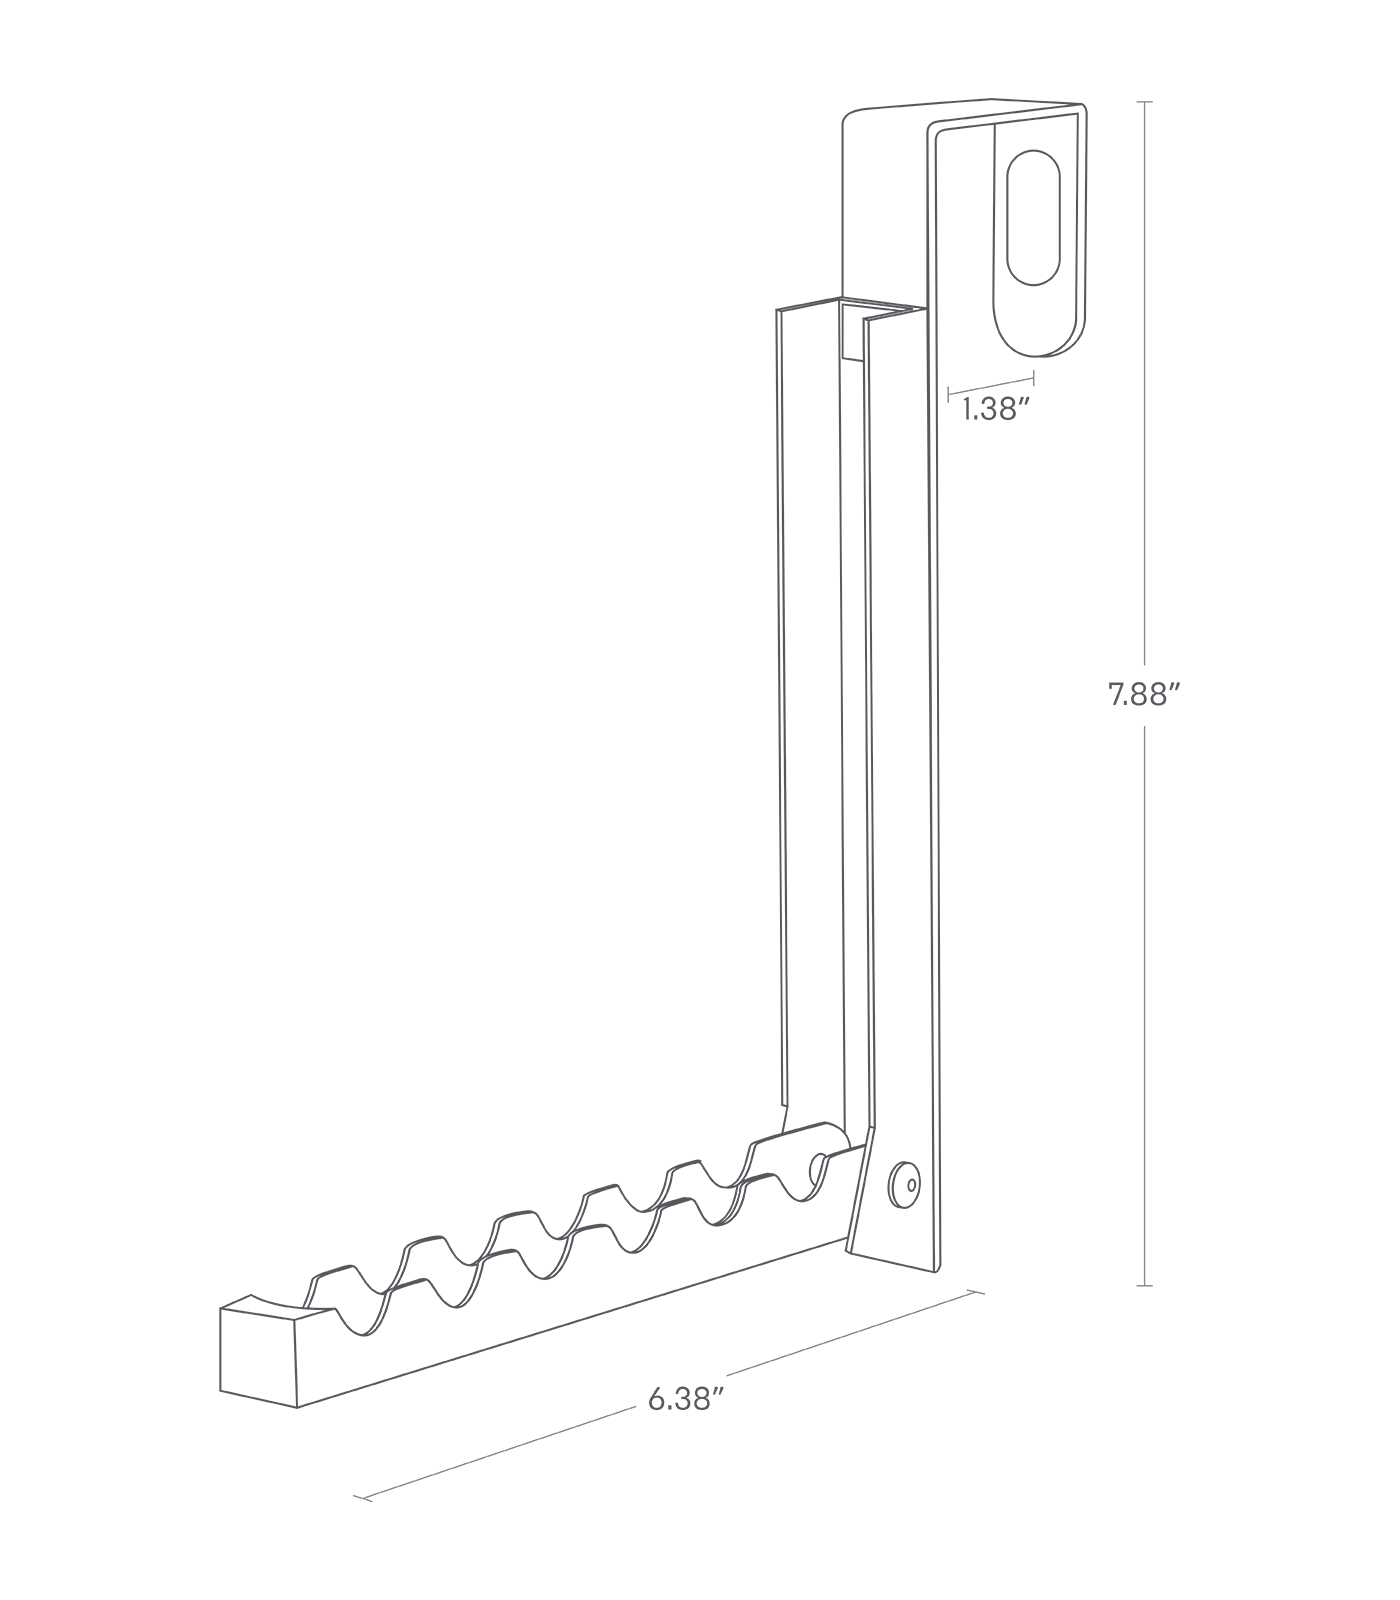 Dimension Image for Over The Door Hook on a white background showing height of 7.88